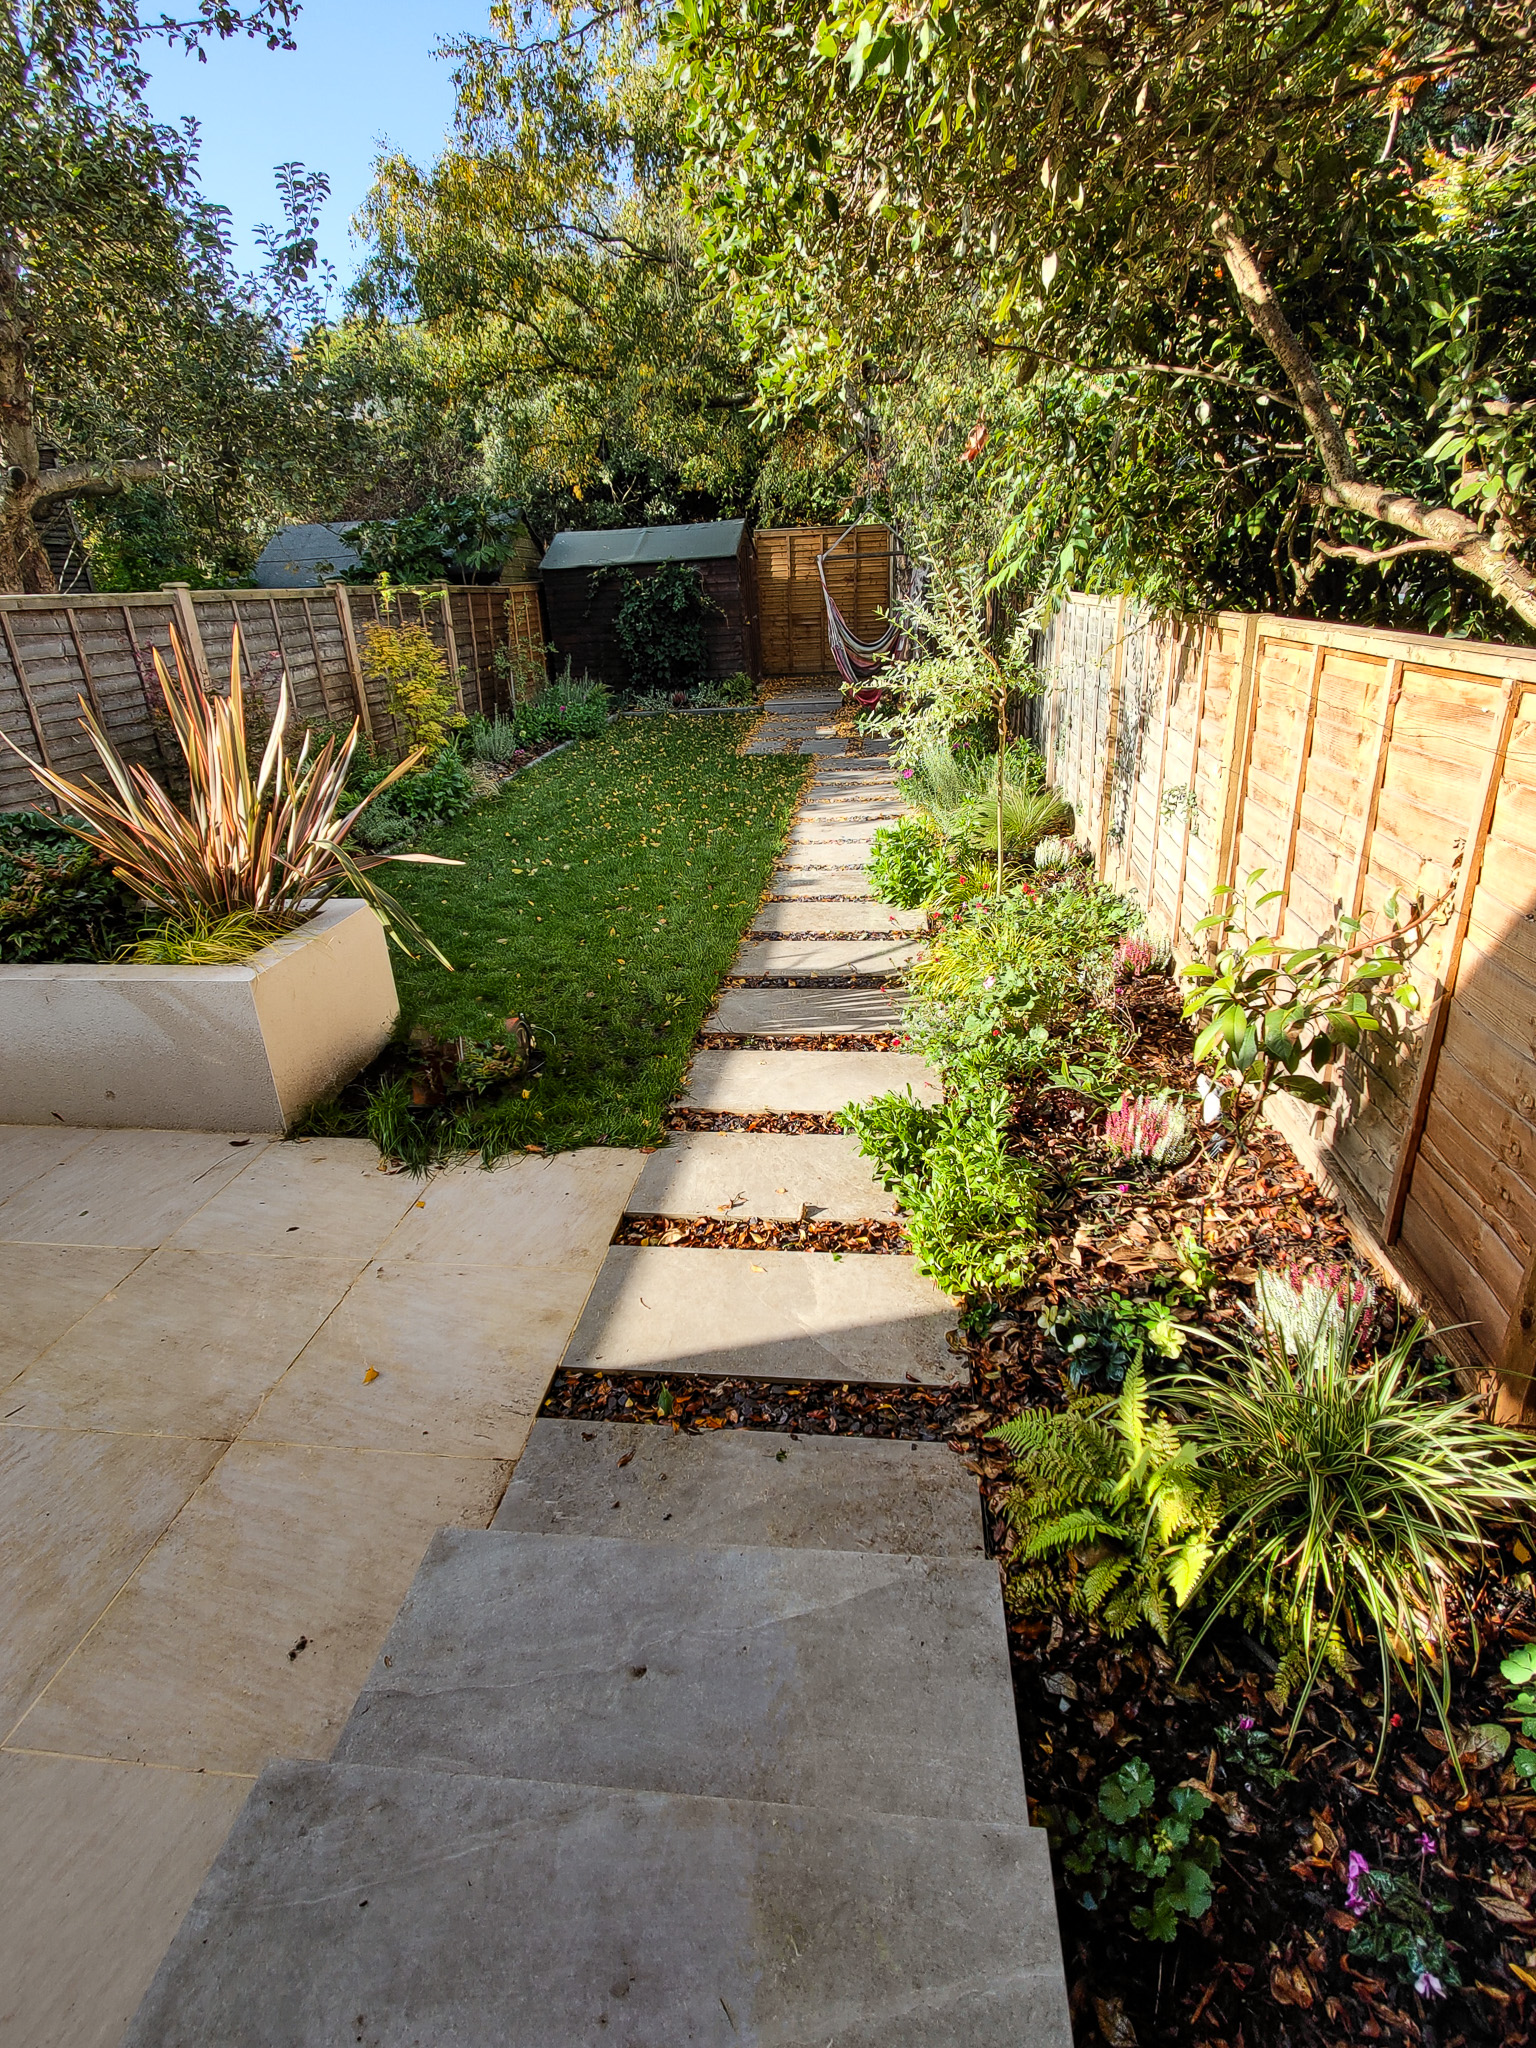 Raynes park garden with raised beds and paving, phormium, acers